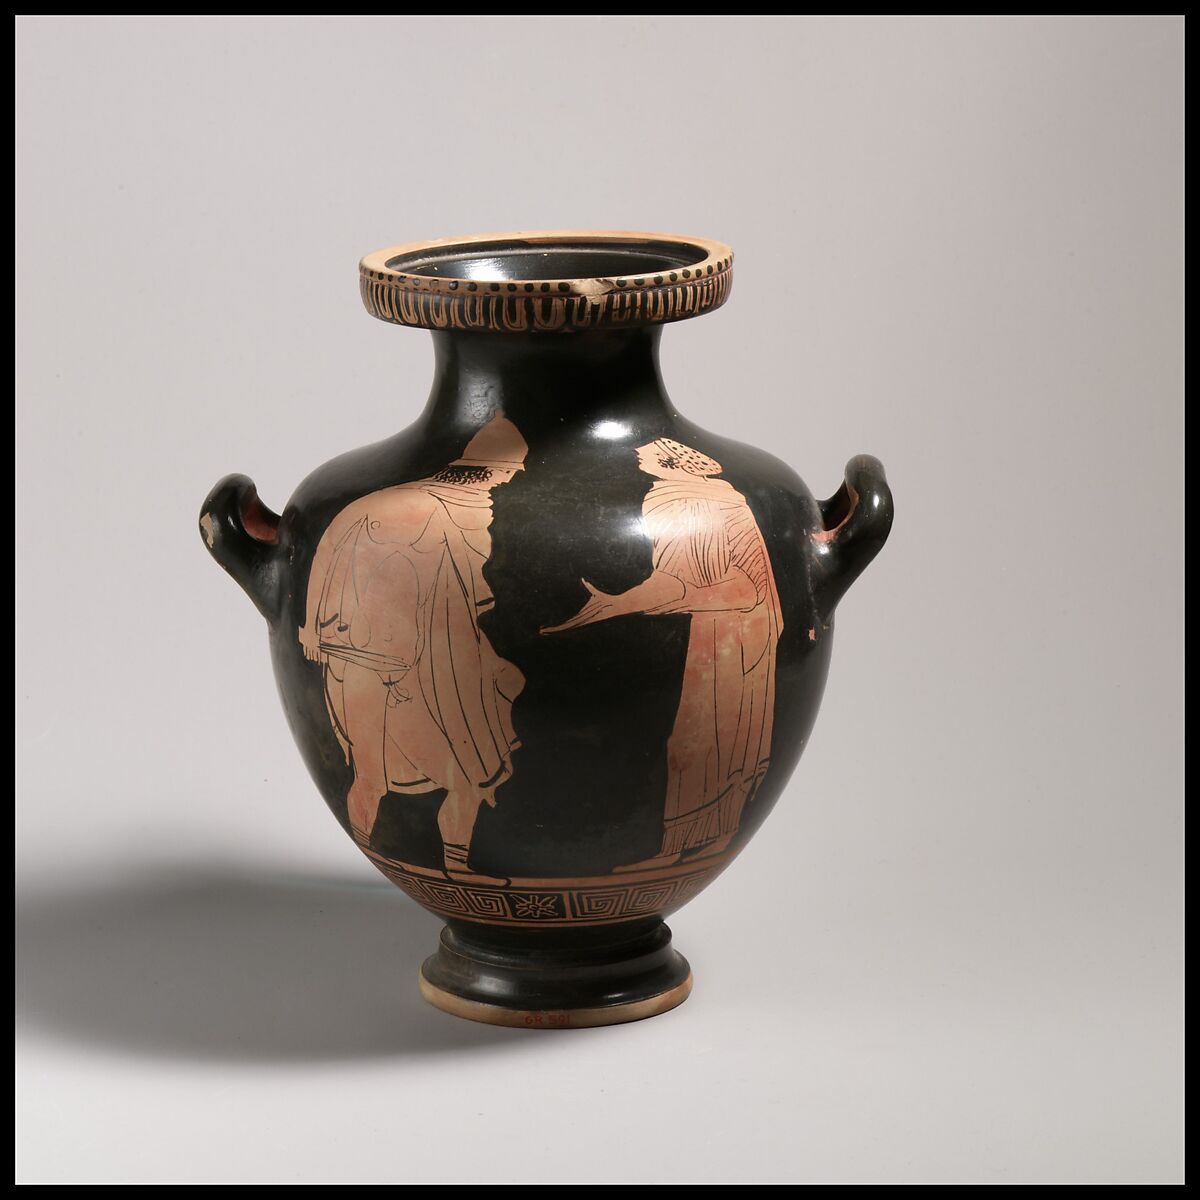 Hydria, Attributed to the Owl-Pillar Group, Terracotta, Greek, South Italian, Campanian 